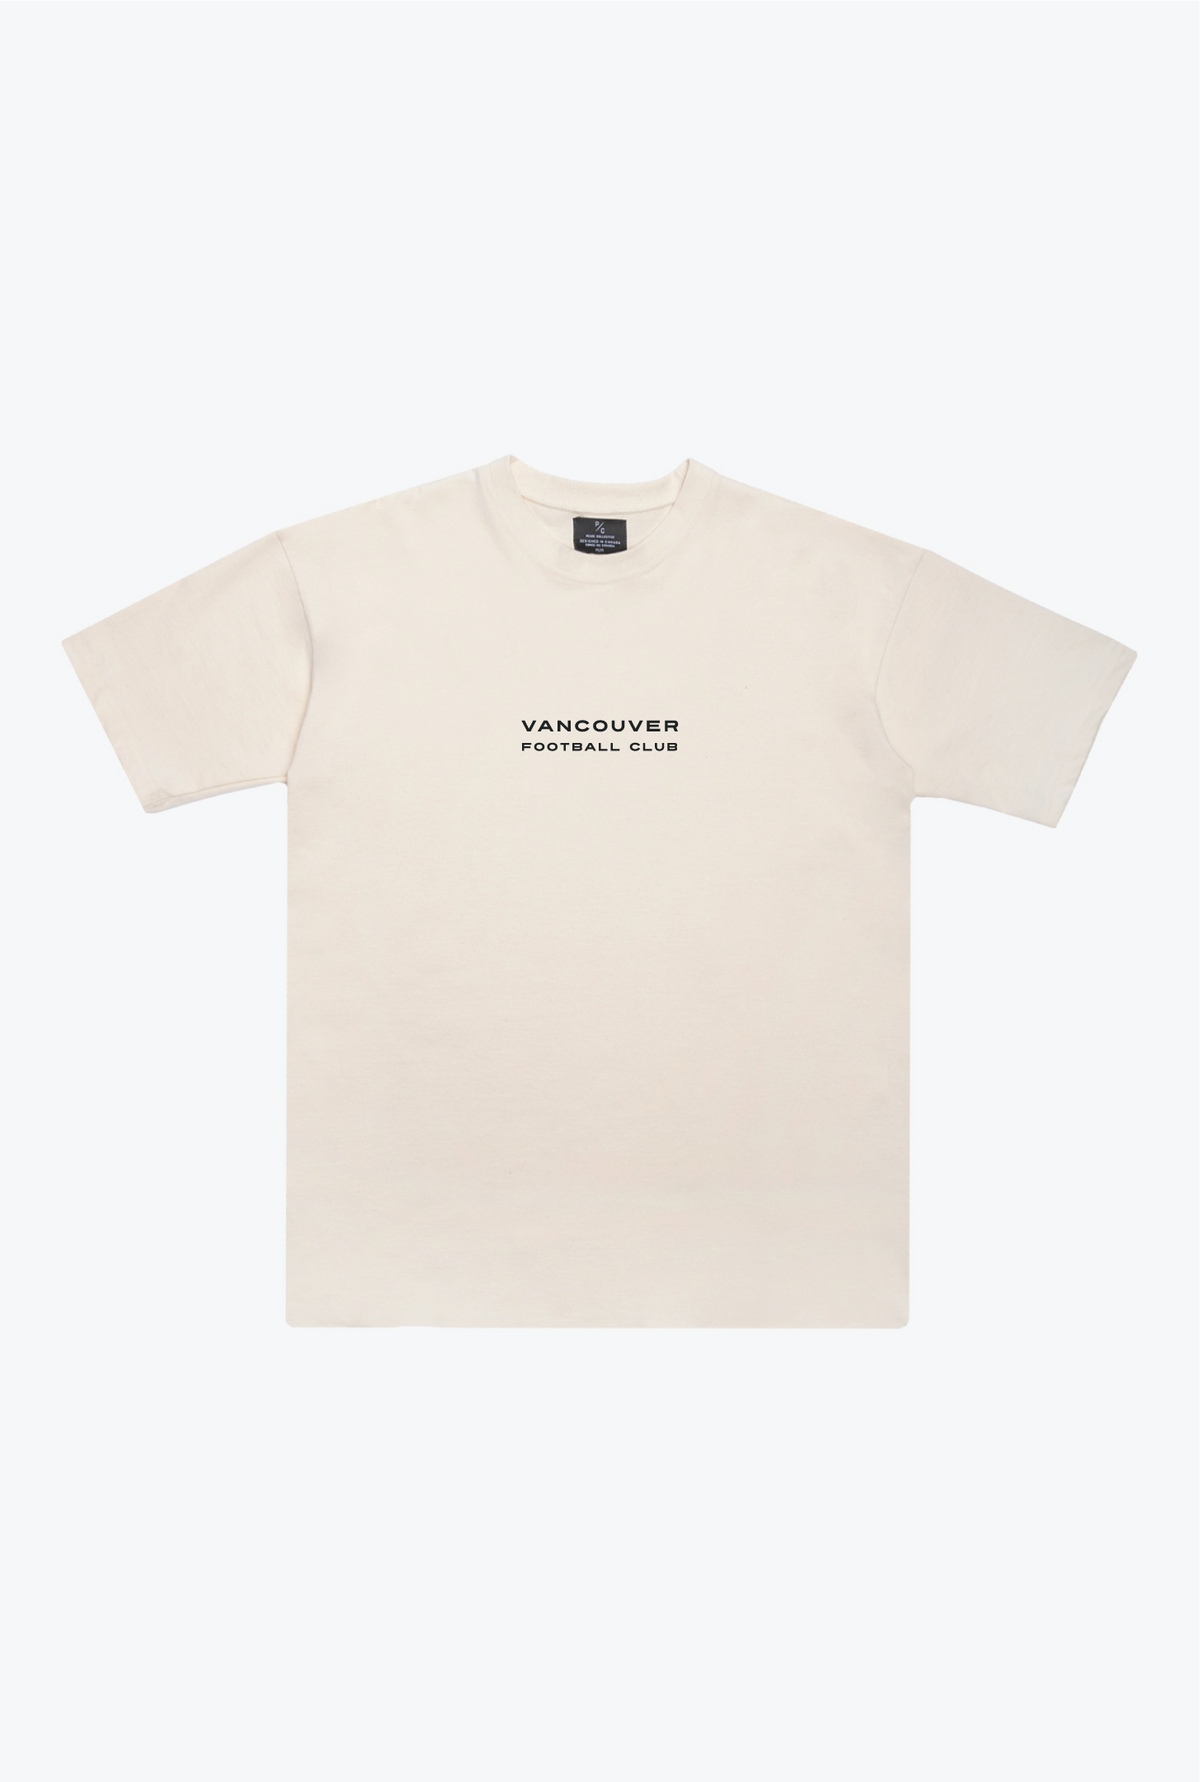 Vancouver FC Heavyweight T-Shirt - Ivory